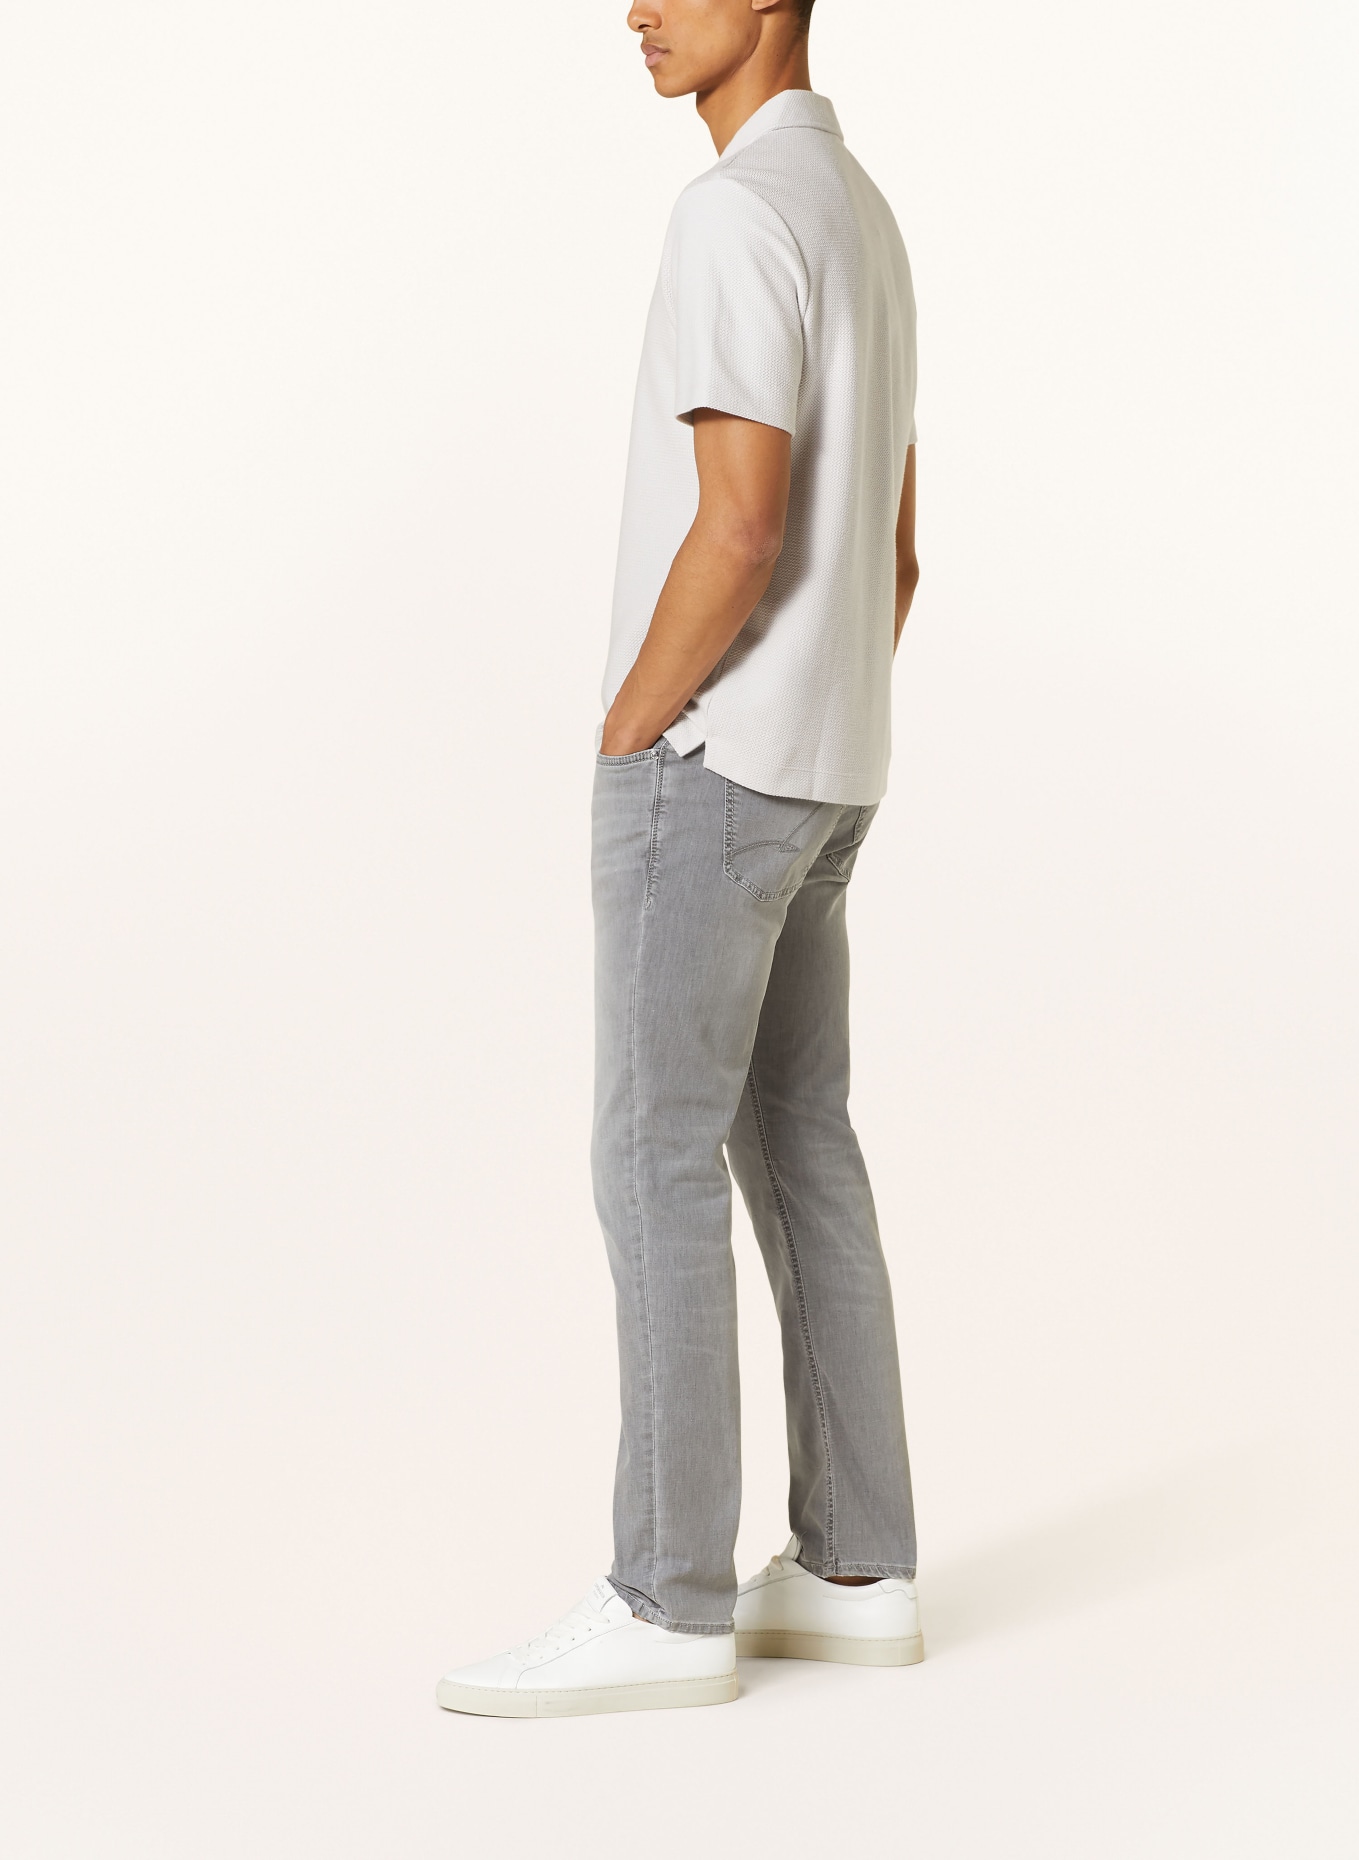 BALDESSARINI Jeans regular fit, Color: 9854 silver used buffies (Image 4)